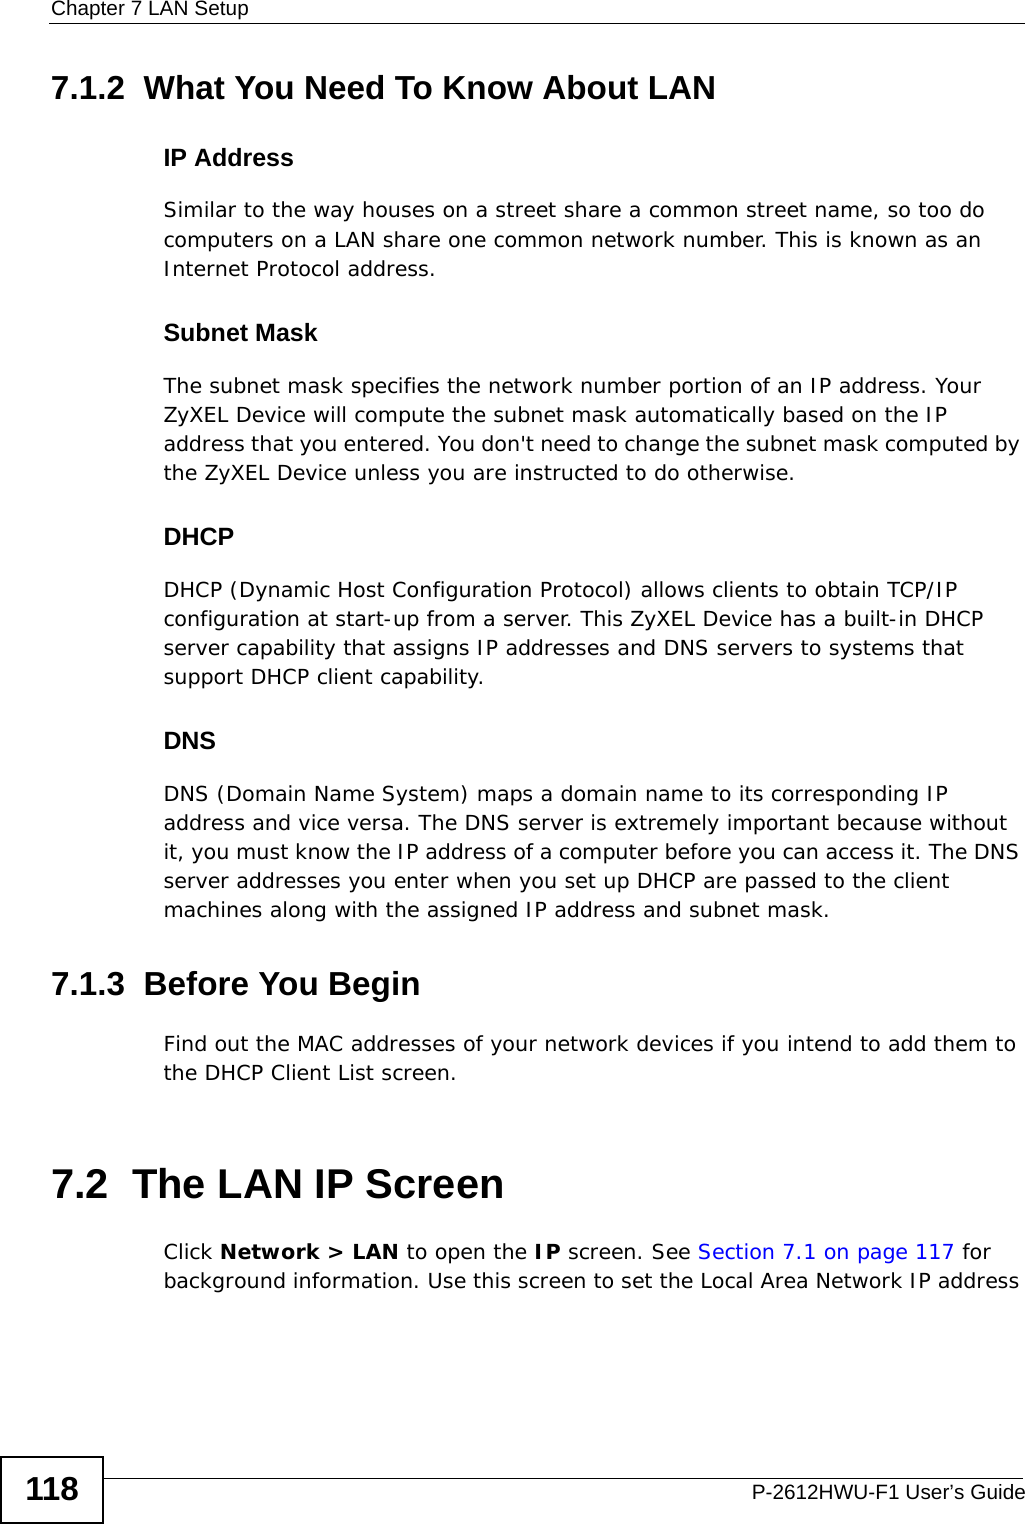 Chapter 7 LAN SetupP-2612HWU-F1 User’s Guide1187.1.2  What You Need To Know About LANIP AddressSimilar to the way houses on a street share a common street name, so too do computers on a LAN share one common network number. This is known as an Internet Protocol address.Subnet MaskThe subnet mask specifies the network number portion of an IP address. Your ZyXEL Device will compute the subnet mask automatically based on the IP address that you entered. You don&apos;t need to change the subnet mask computed by the ZyXEL Device unless you are instructed to do otherwise.DHCPDHCP (Dynamic Host Configuration Protocol) allows clients to obtain TCP/IP configuration at start-up from a server. This ZyXEL Device has a built-in DHCP server capability that assigns IP addresses and DNS servers to systems that support DHCP client capability.DNSDNS (Domain Name System) maps a domain name to its corresponding IP address and vice versa. The DNS server is extremely important because without it, you must know the IP address of a computer before you can access it. The DNS server addresses you enter when you set up DHCP are passed to the client machines along with the assigned IP address and subnet mask.7.1.3  Before You BeginFind out the MAC addresses of your network devices if you intend to add them to the DHCP Client List screen.7.2  The LAN IP ScreenClick Network &gt; LAN to open the IP screen. See Section 7.1 on page 117 for background information. Use this screen to set the Local Area Network IP address 